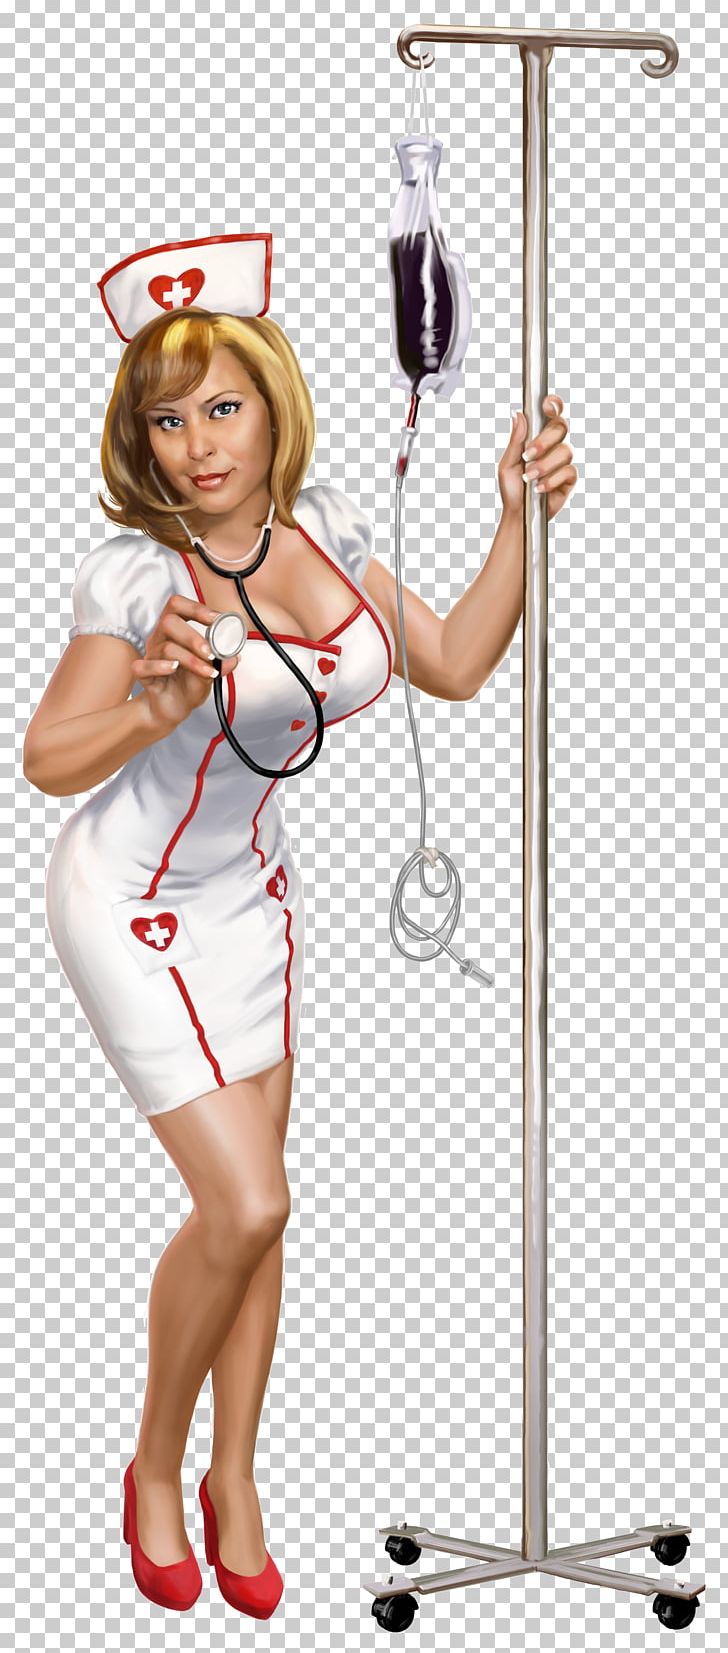 Heart Attack Grill Hamburger French Fries Restaurant Nurse PNG, Clipart, Arm, Calorie, Chef, Costume, Fictional Character Free PNG Download